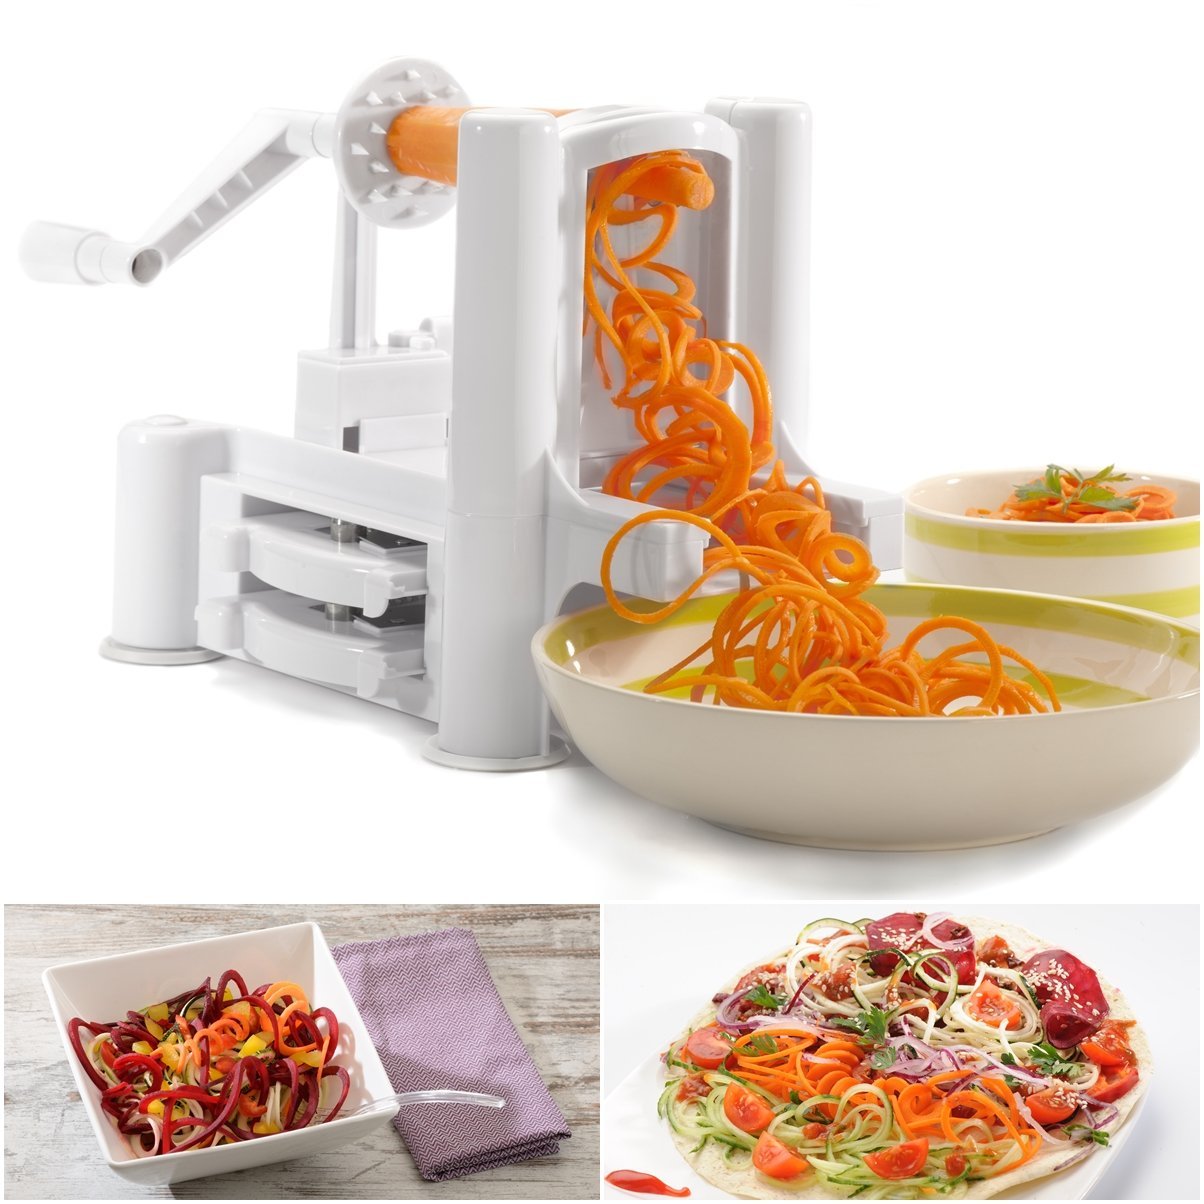 6 Clever Kitchen Gadgets Foodies Will Love